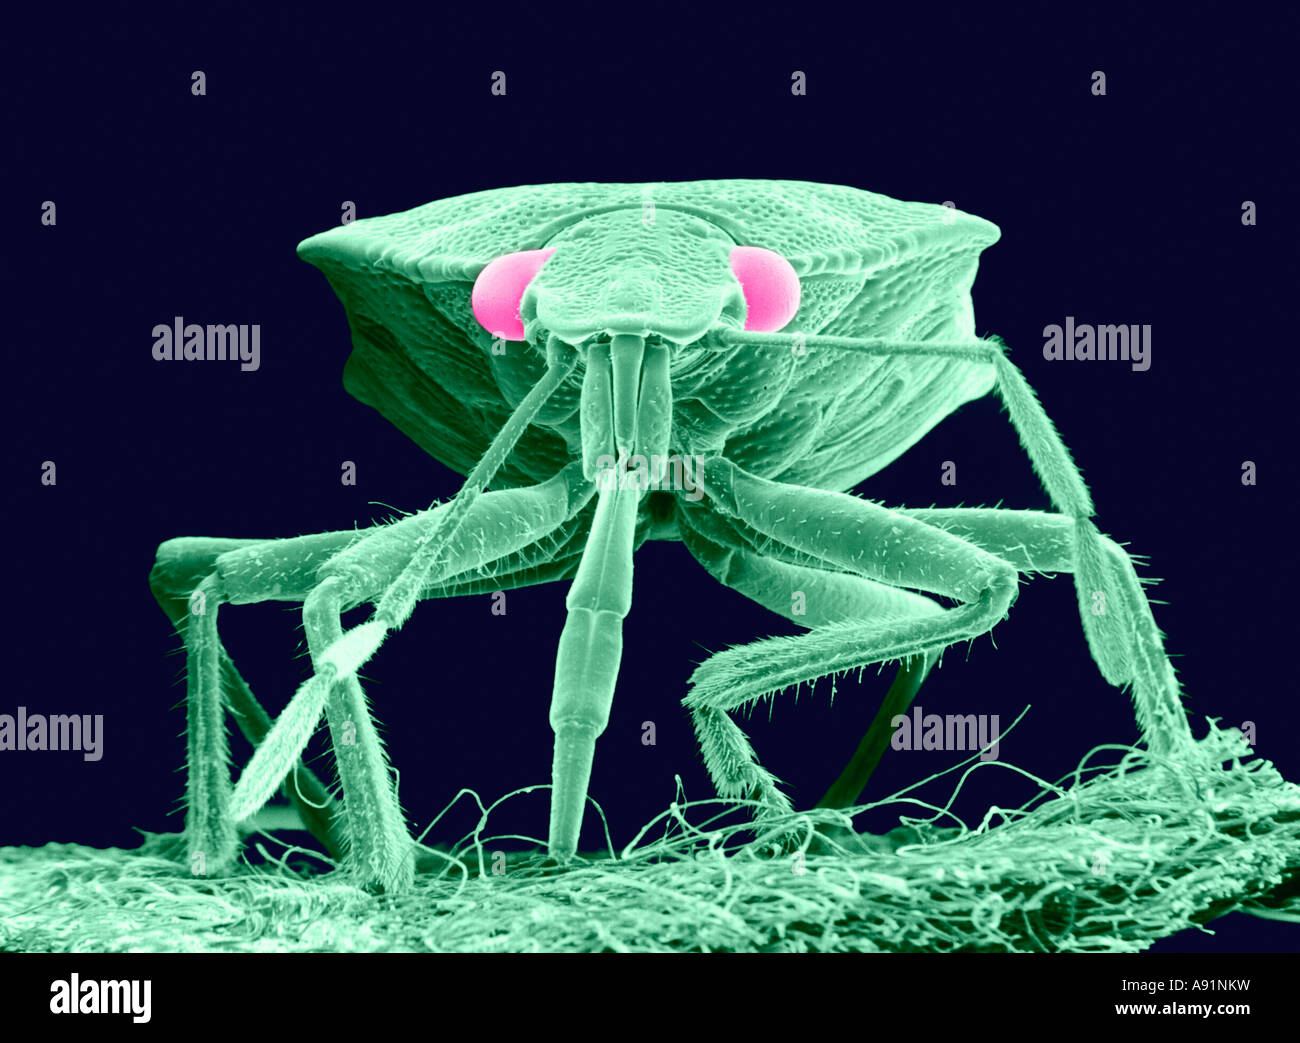 Scanning Electron Microscope image of a Plant Bug magnified approximately 30X (Color enhanced) Stock Photo